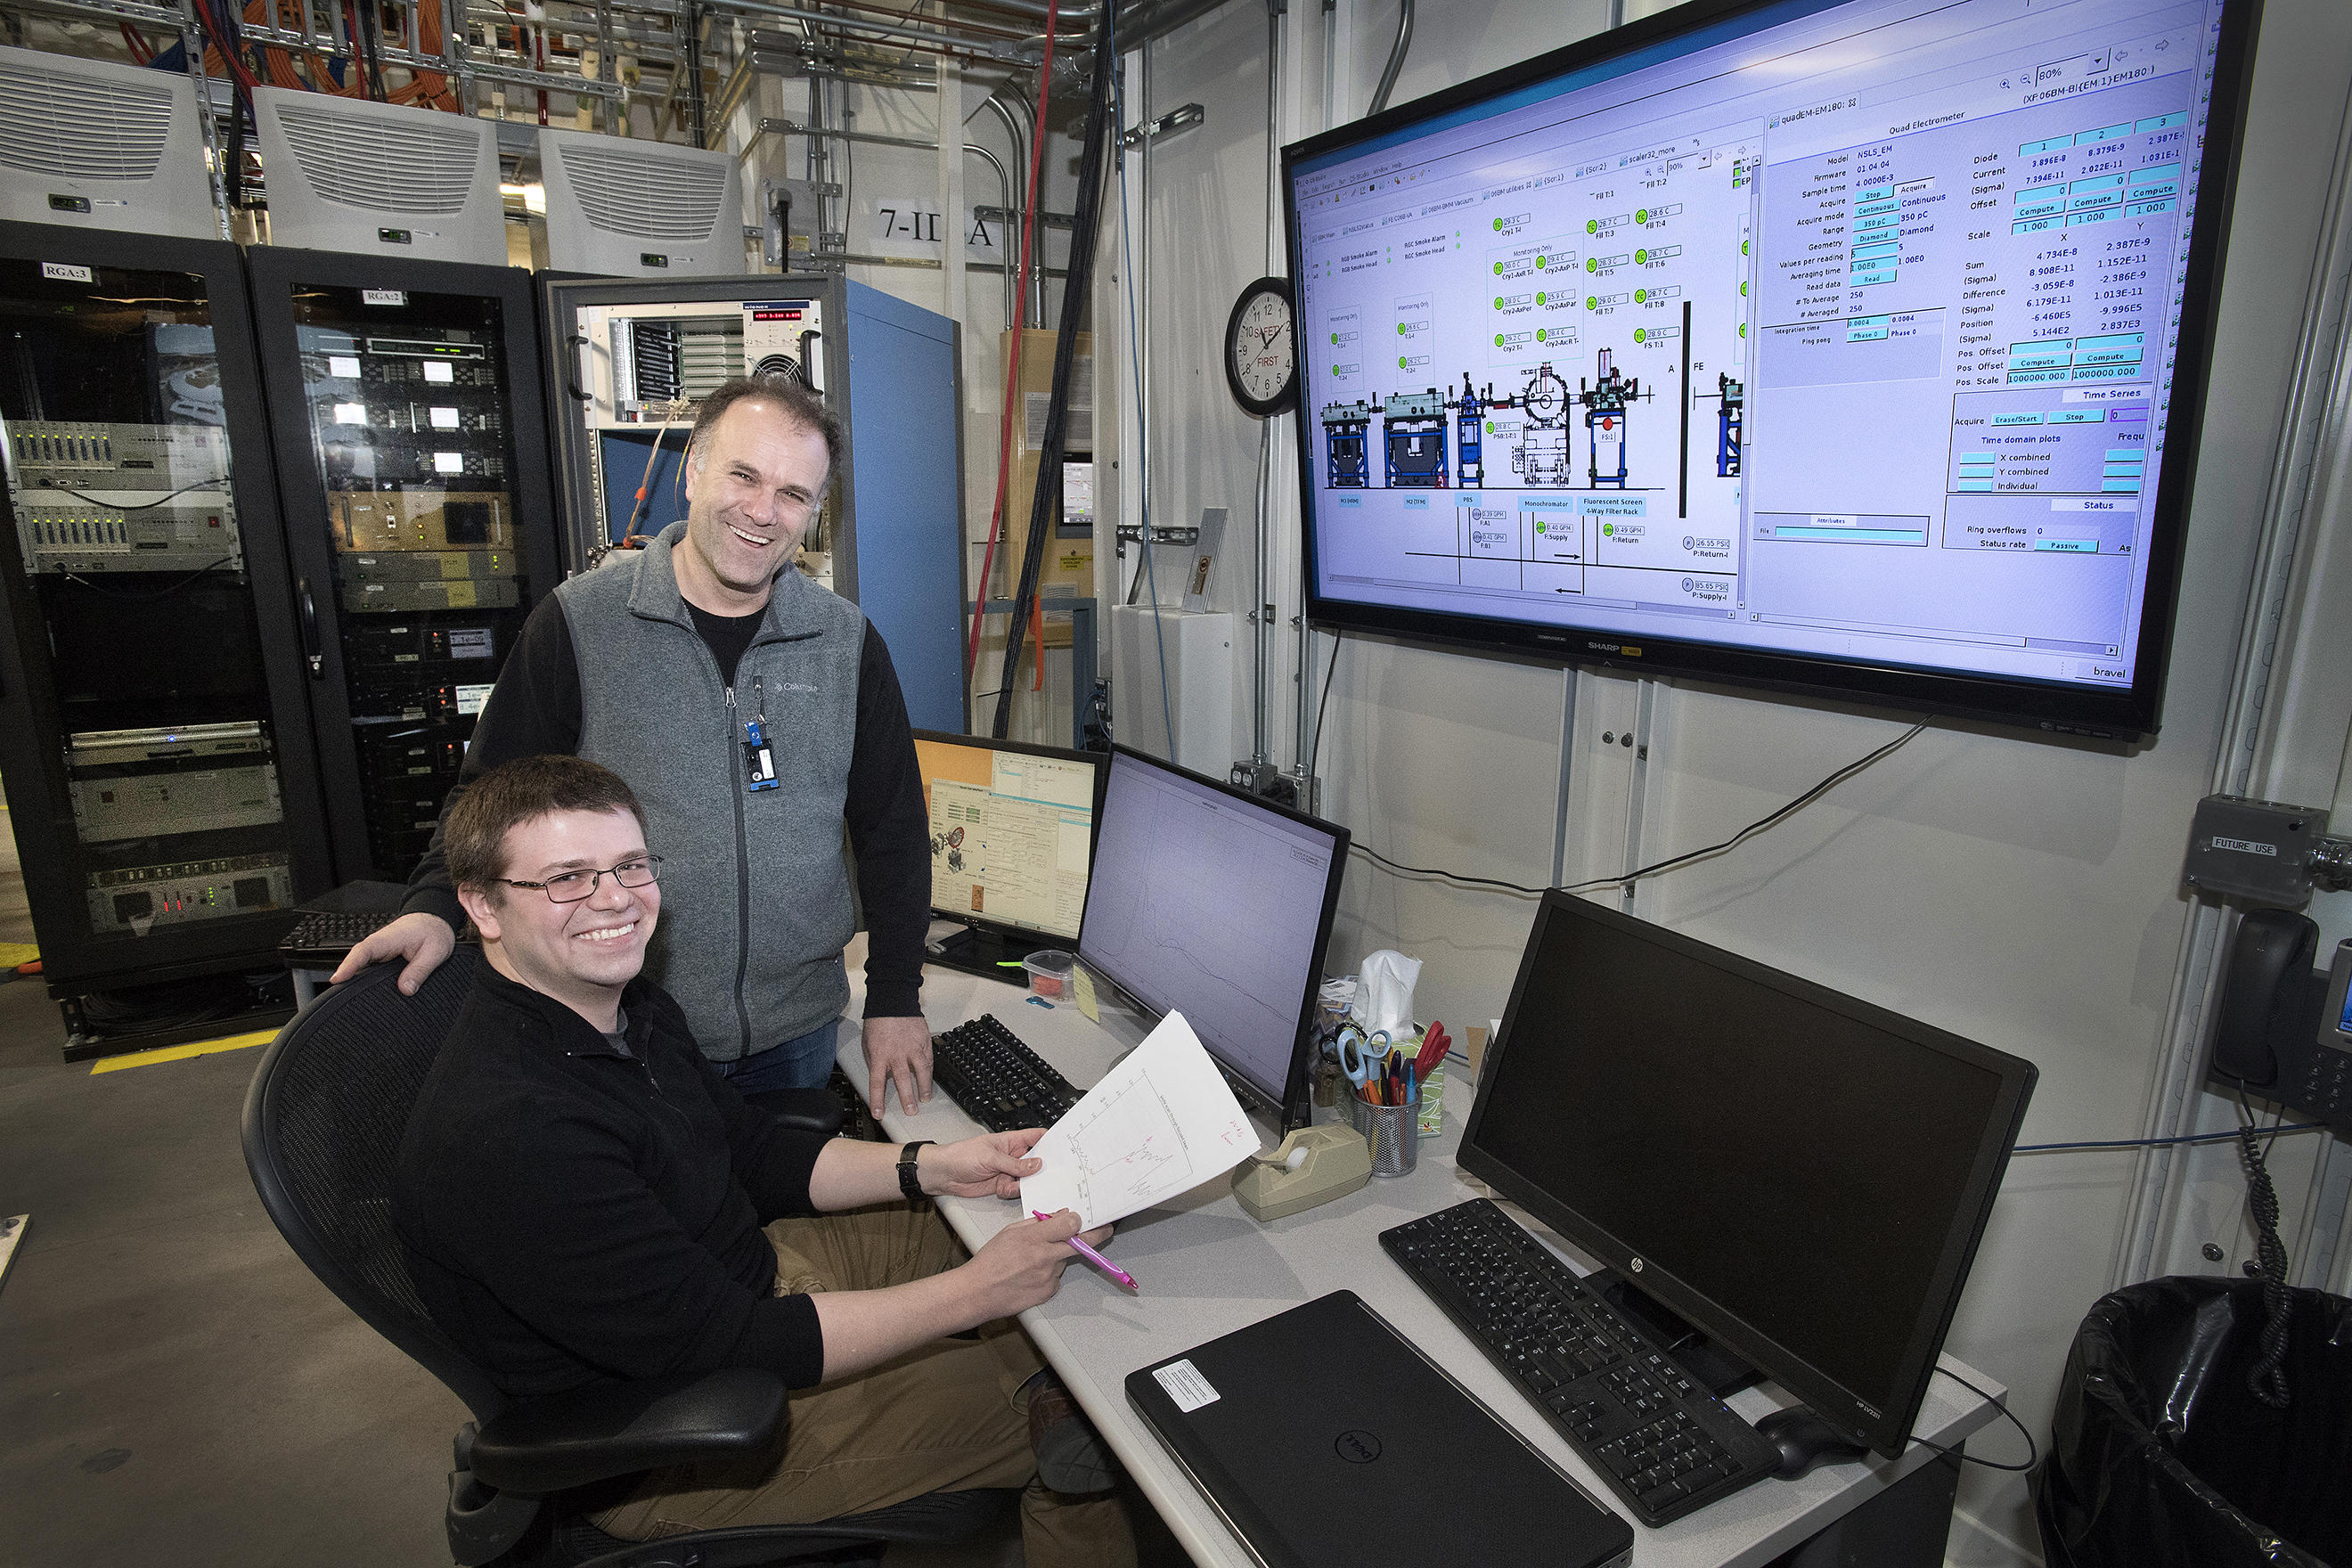 New NIST Beamlines Now Open at Brookhaven for Materials Research